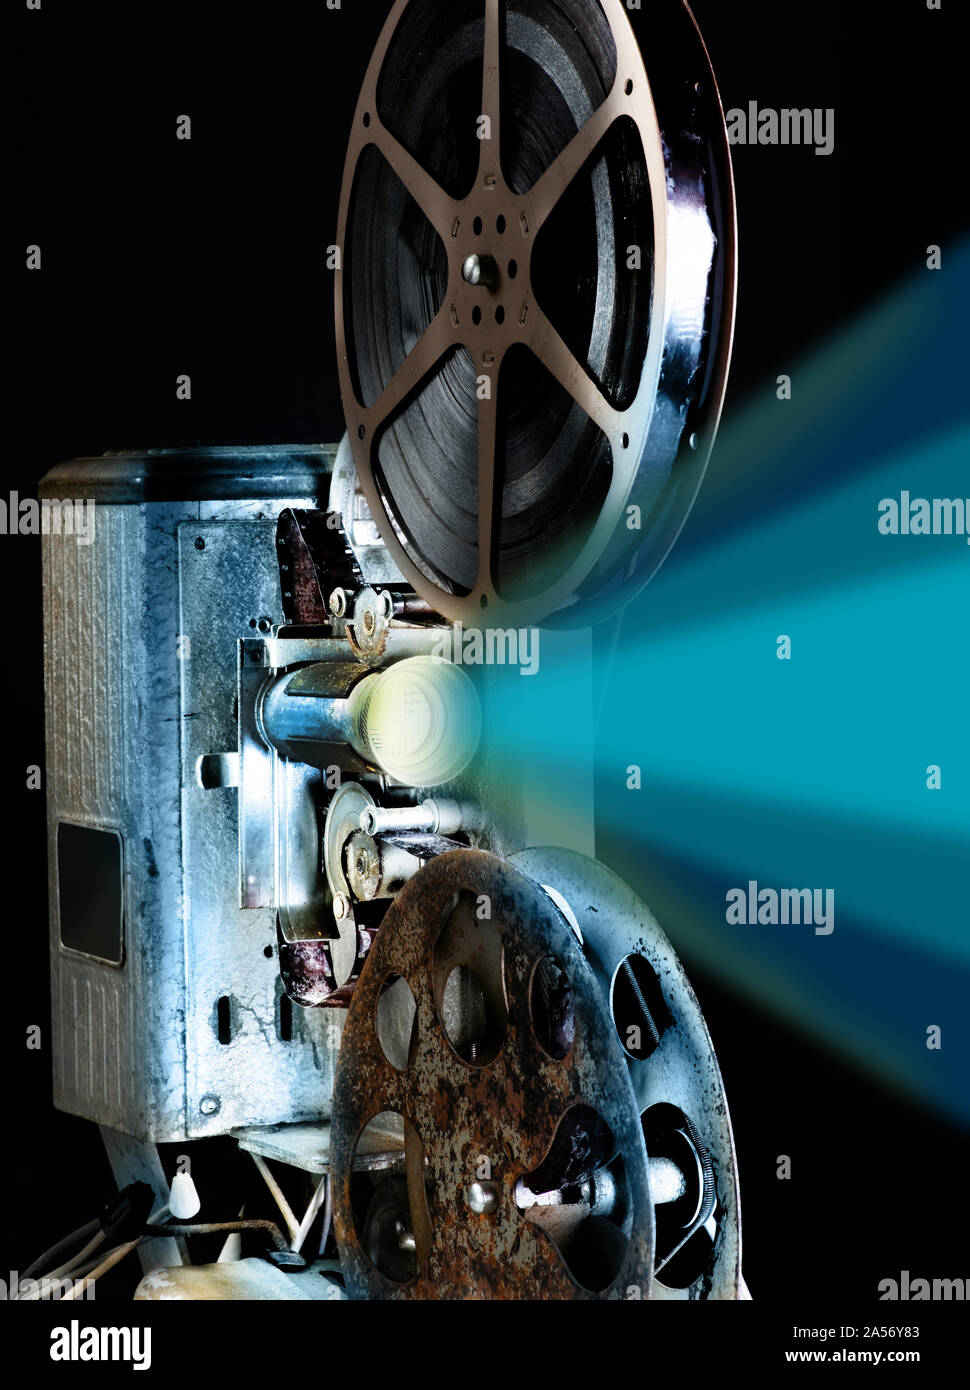 16mm film projector from the 1940's. Stock Photo